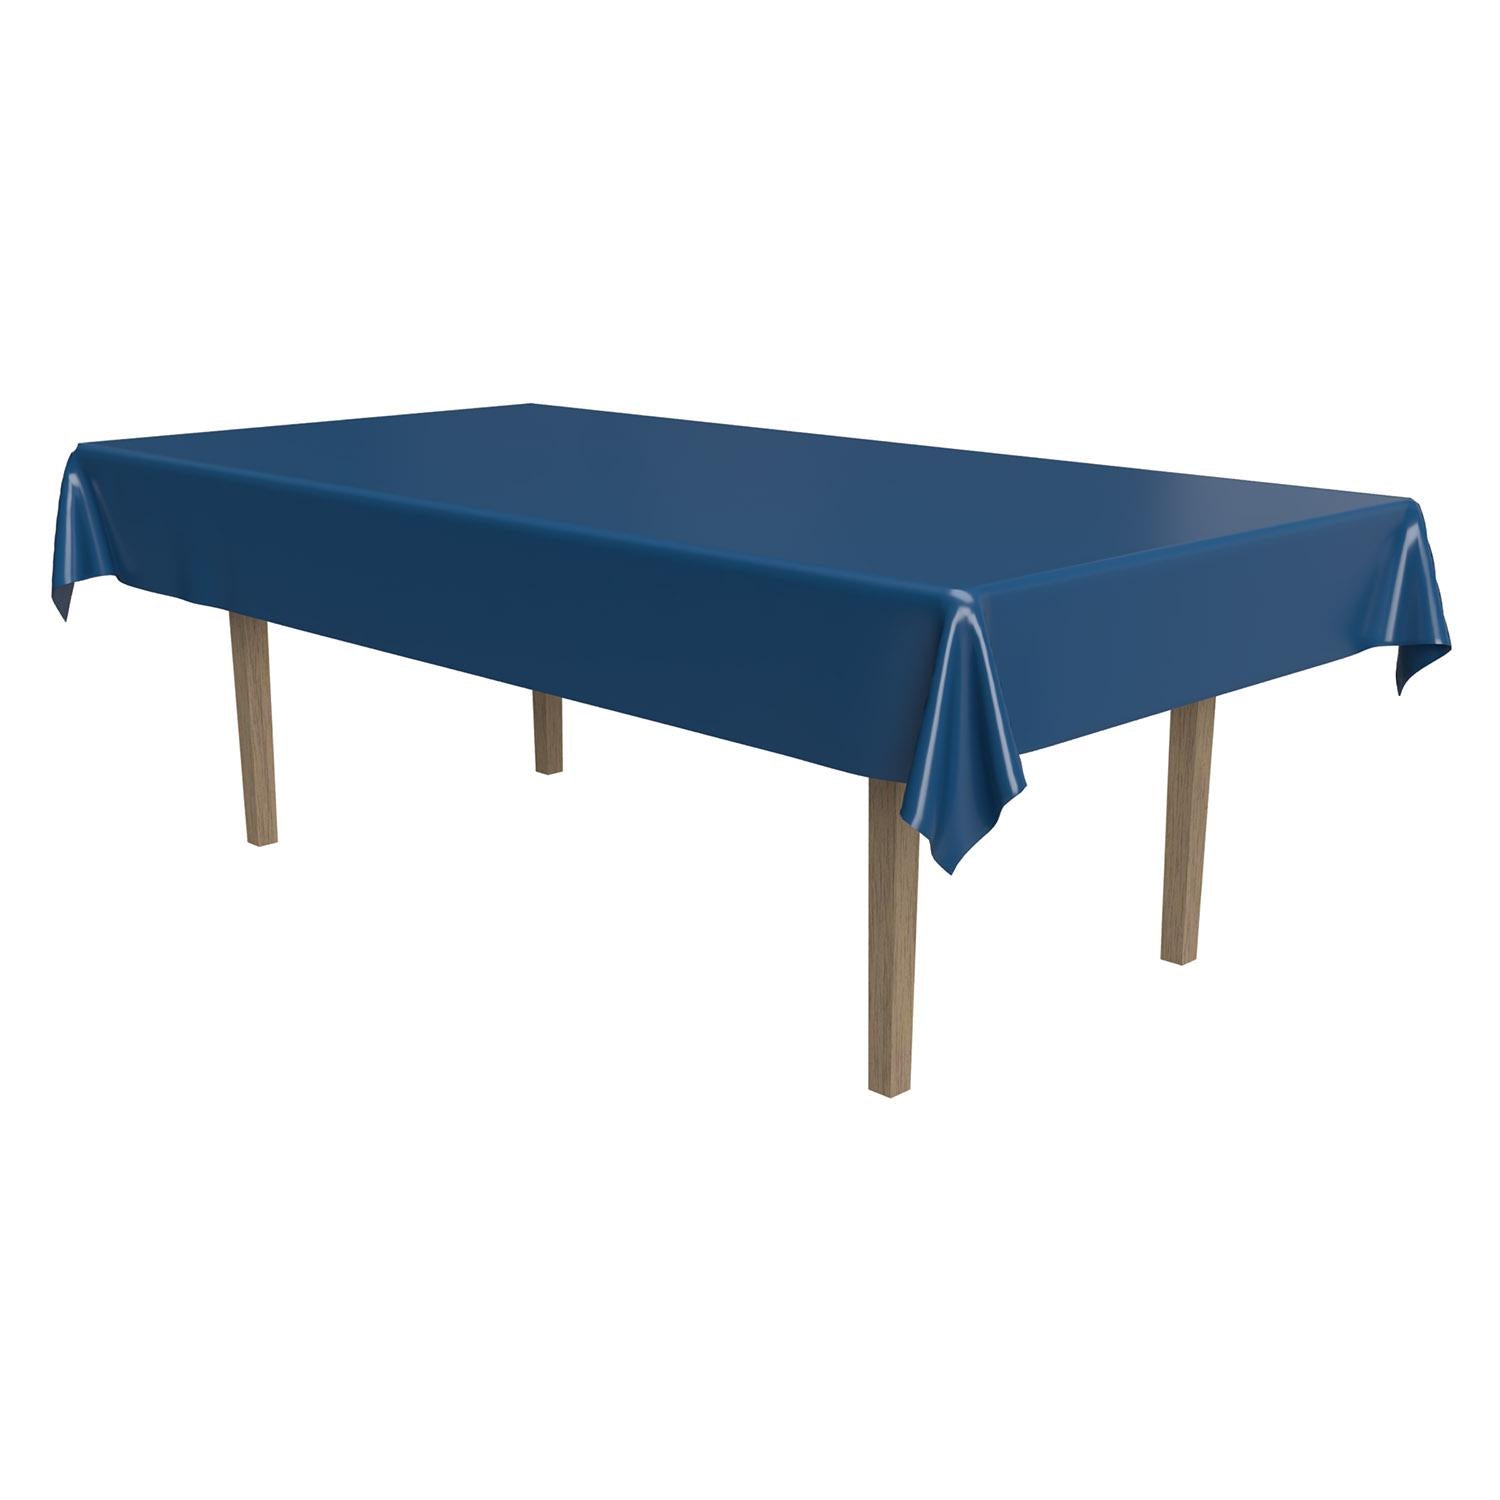 Beistle Plastic Rectangular Party Tablecover - blue